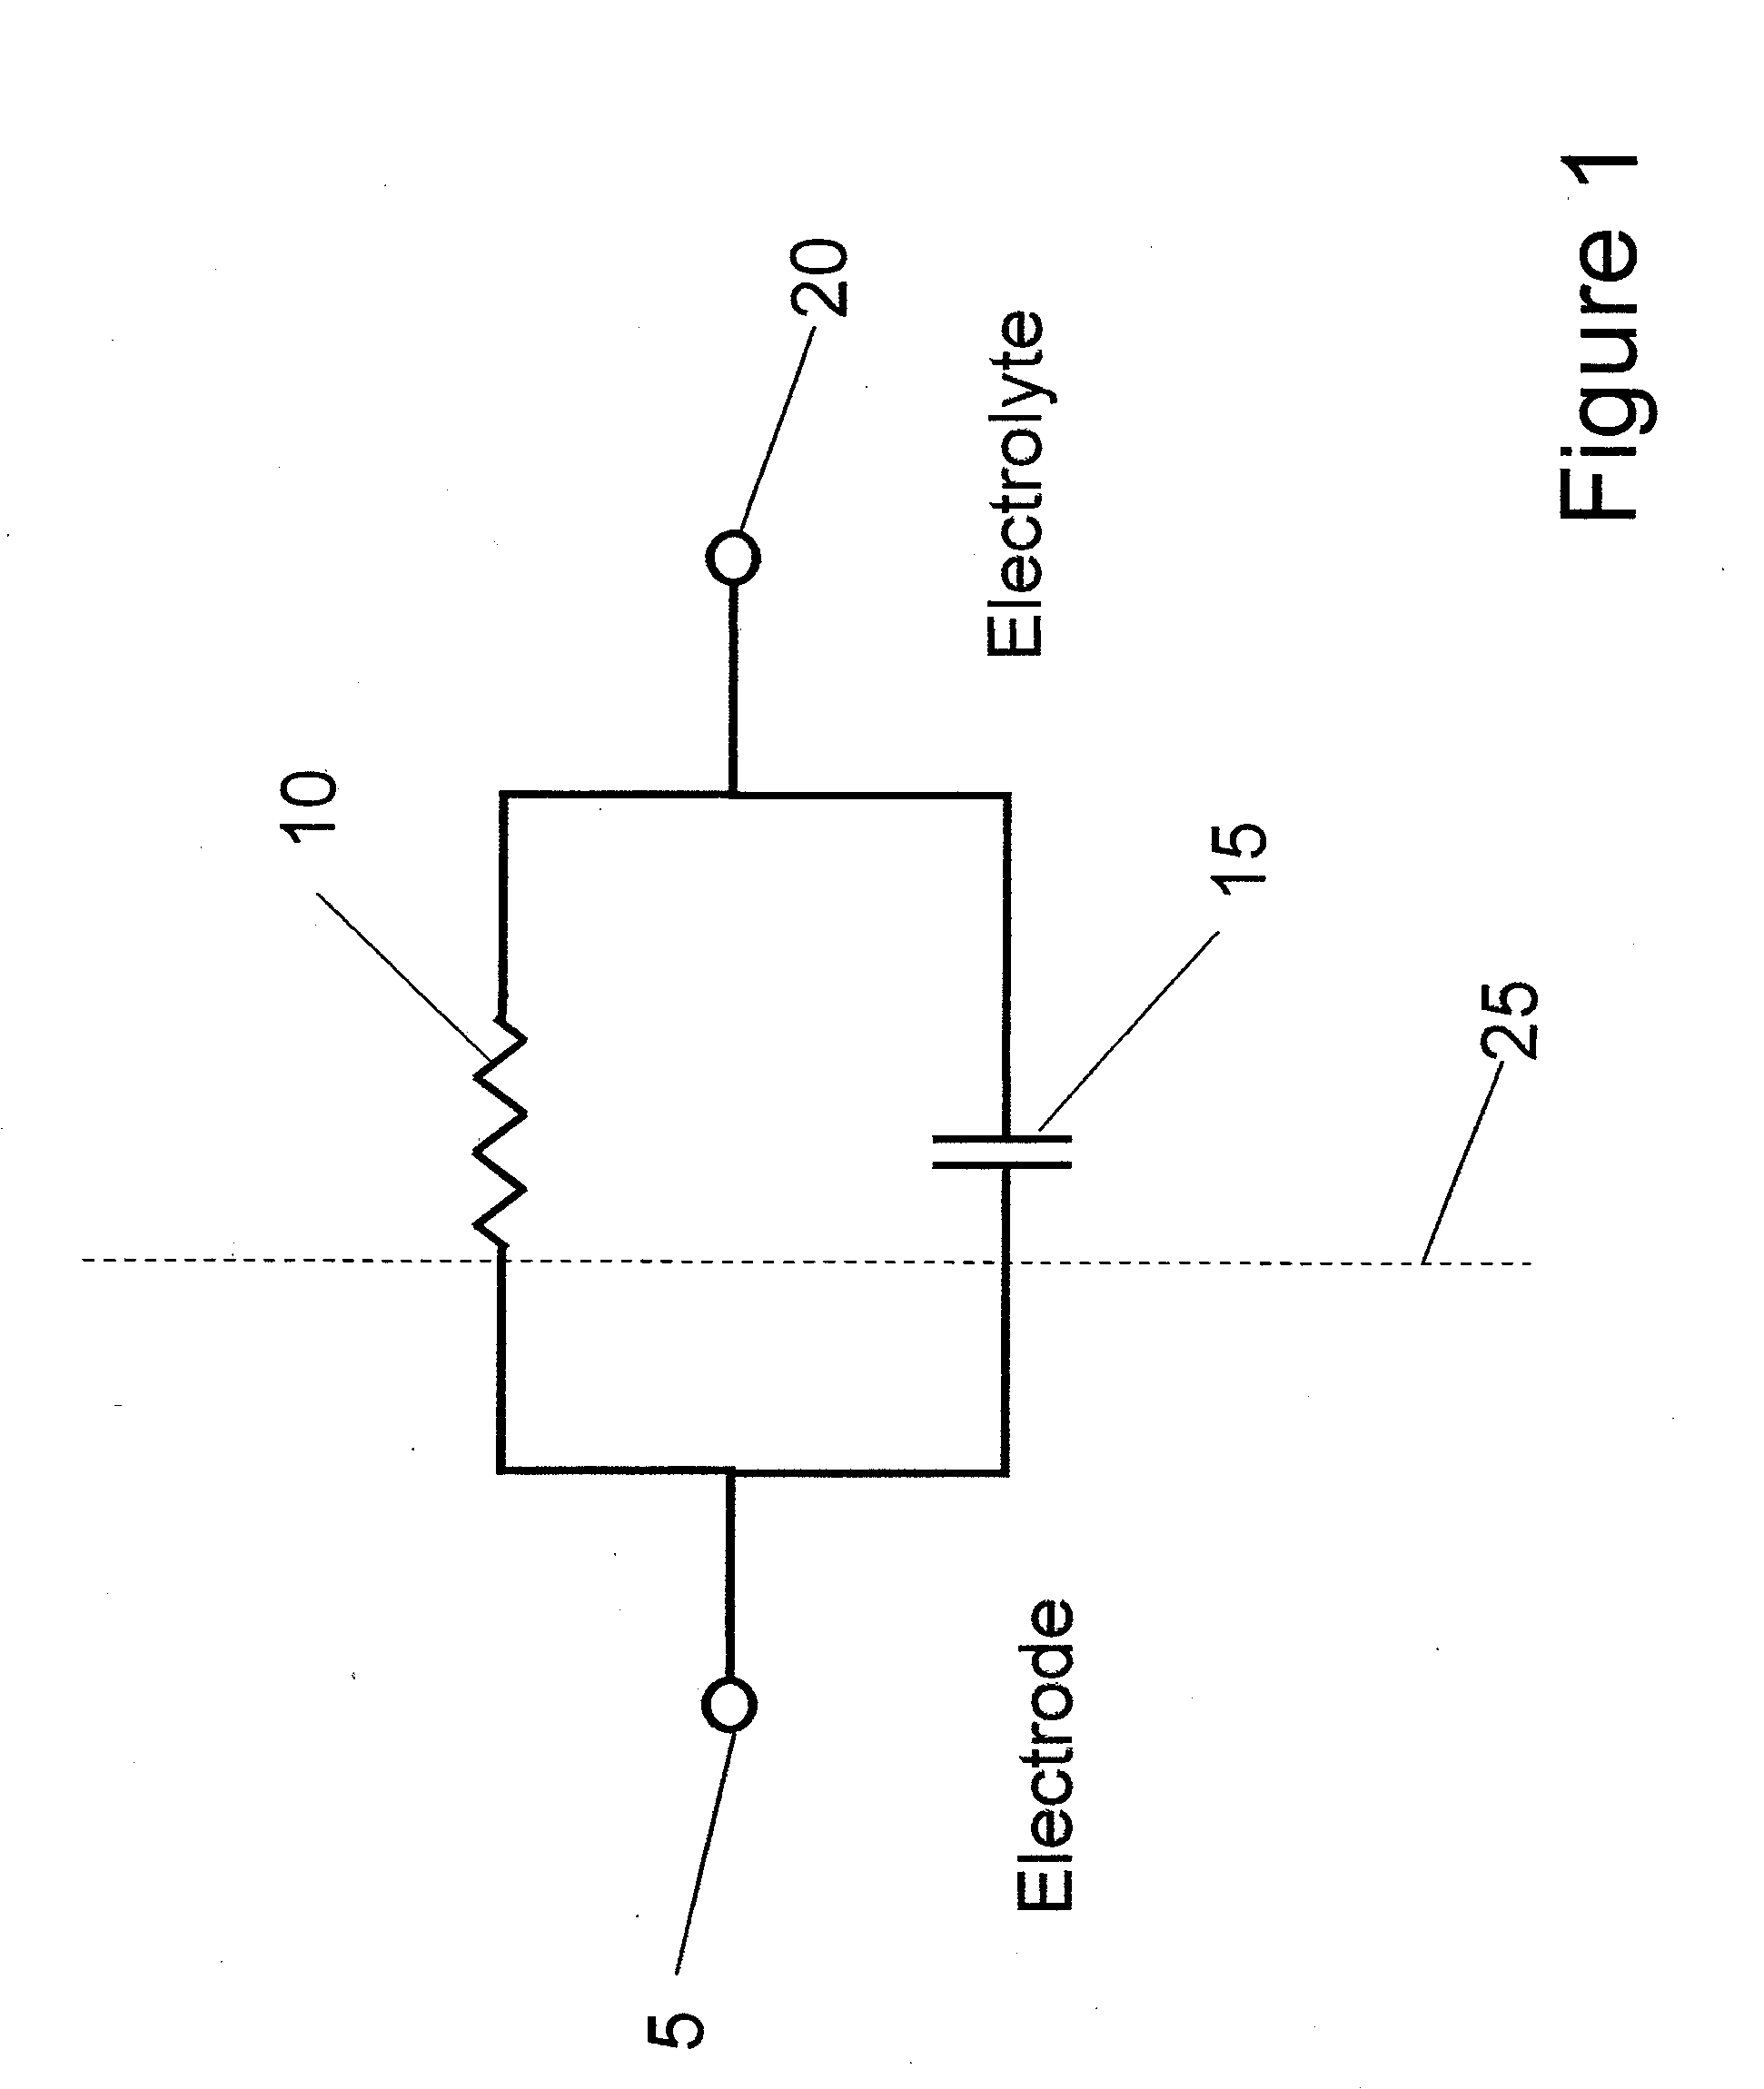 Use of electric fields to minimize rejection of implanted devices and materials